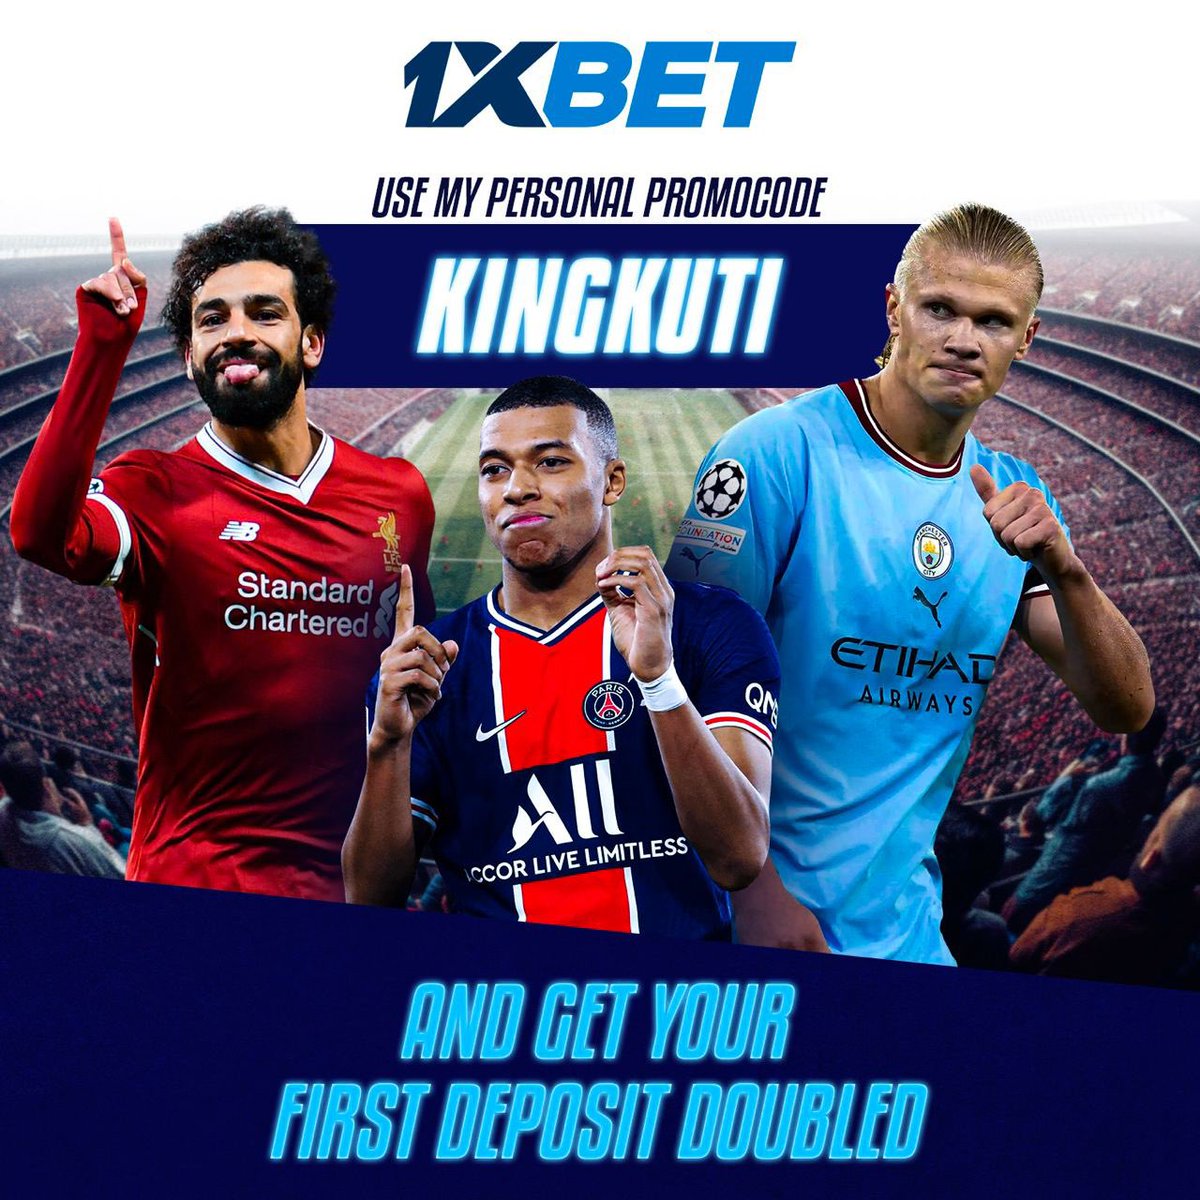 Today’s game on @1xBet_Eng Global Code 👉👉 JR8U1 Have you registered on 1xbet yet?? Register now using this link below to get 100% welcome bonus 👇👇 tinyurl.com/y9dyjcc8 Promo code 👉 KINGKUTI